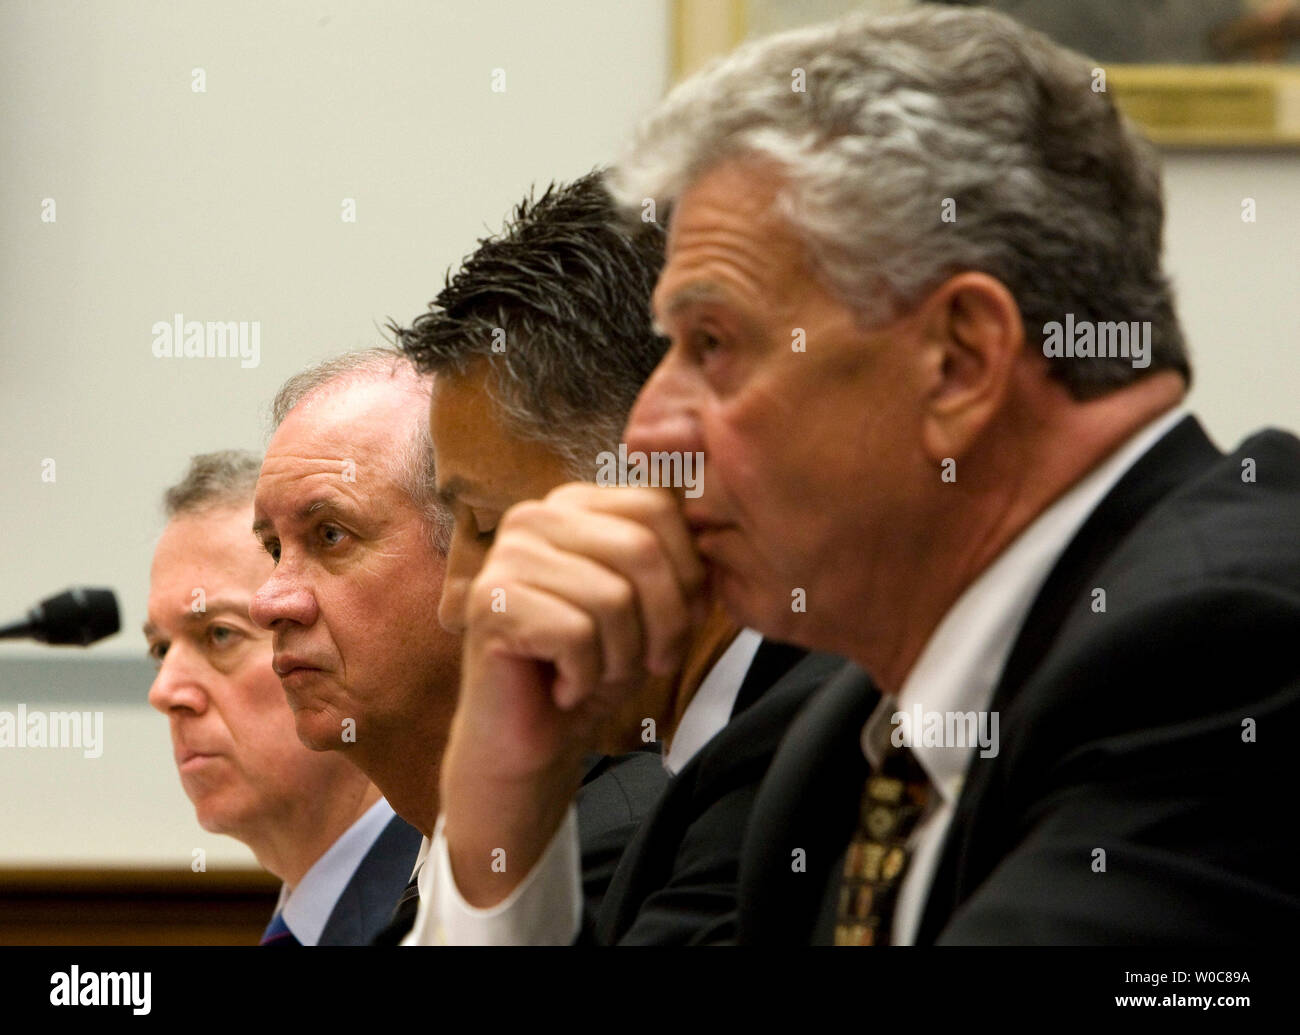 (L to R) Jim Shea, president of Gulf Stream Coach, Inc., Steve Bennet, president of Pilgrim International, Inc., Ronald Fenech, president of Keystone RV, Inc., and Peter Liegl, president and CEO of Forest River, Inc. are sworn in before testifying before a House Oversight and Government Reform Committee hearing on the manufacturers of FEMA (Federal Emergency Management Agency) trailers and elevated formaldehyde levels found in the trailers provided to the victims of the Gulf Coast hurricanes of 2005 on Capitol Hill in Washington on July 9, 2008. (UPI Photo/Patrick D. McDermott) Stock Photo